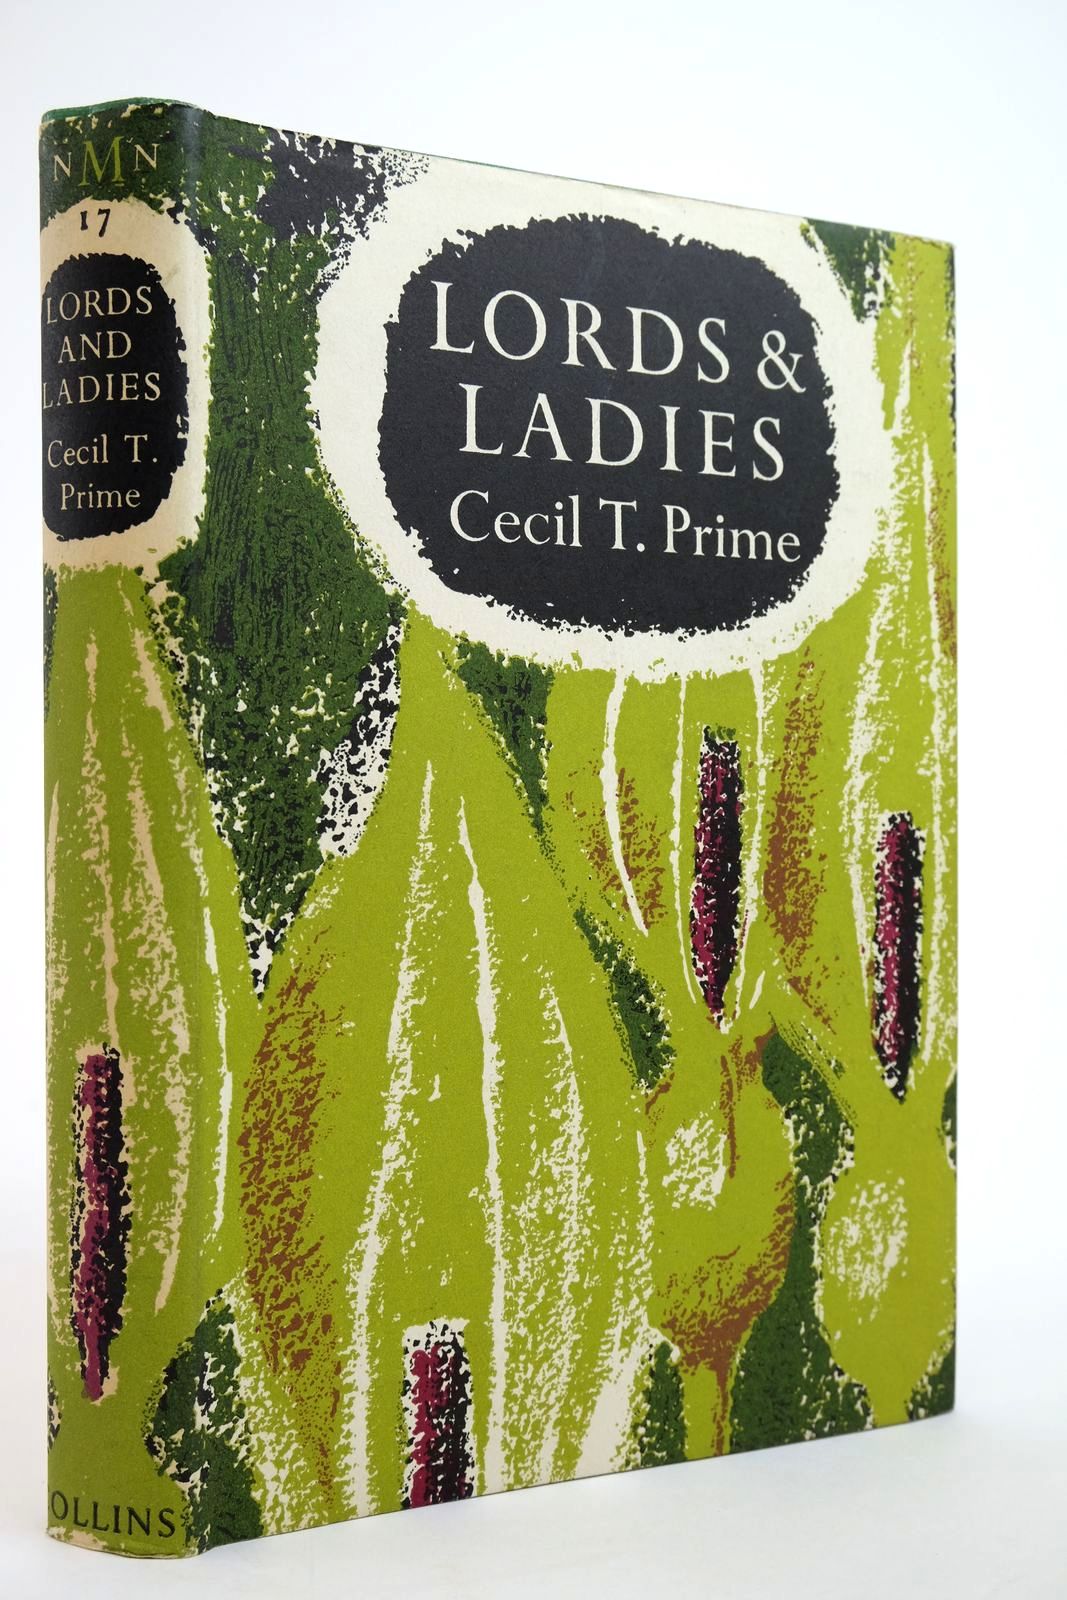 Photo of LORDS & LADIES (NMN 17) written by Prime, C.T. illustrated by Jones, Robert J. published by Collins (STOCK CODE: 2134984)  for sale by Stella & Rose's Books